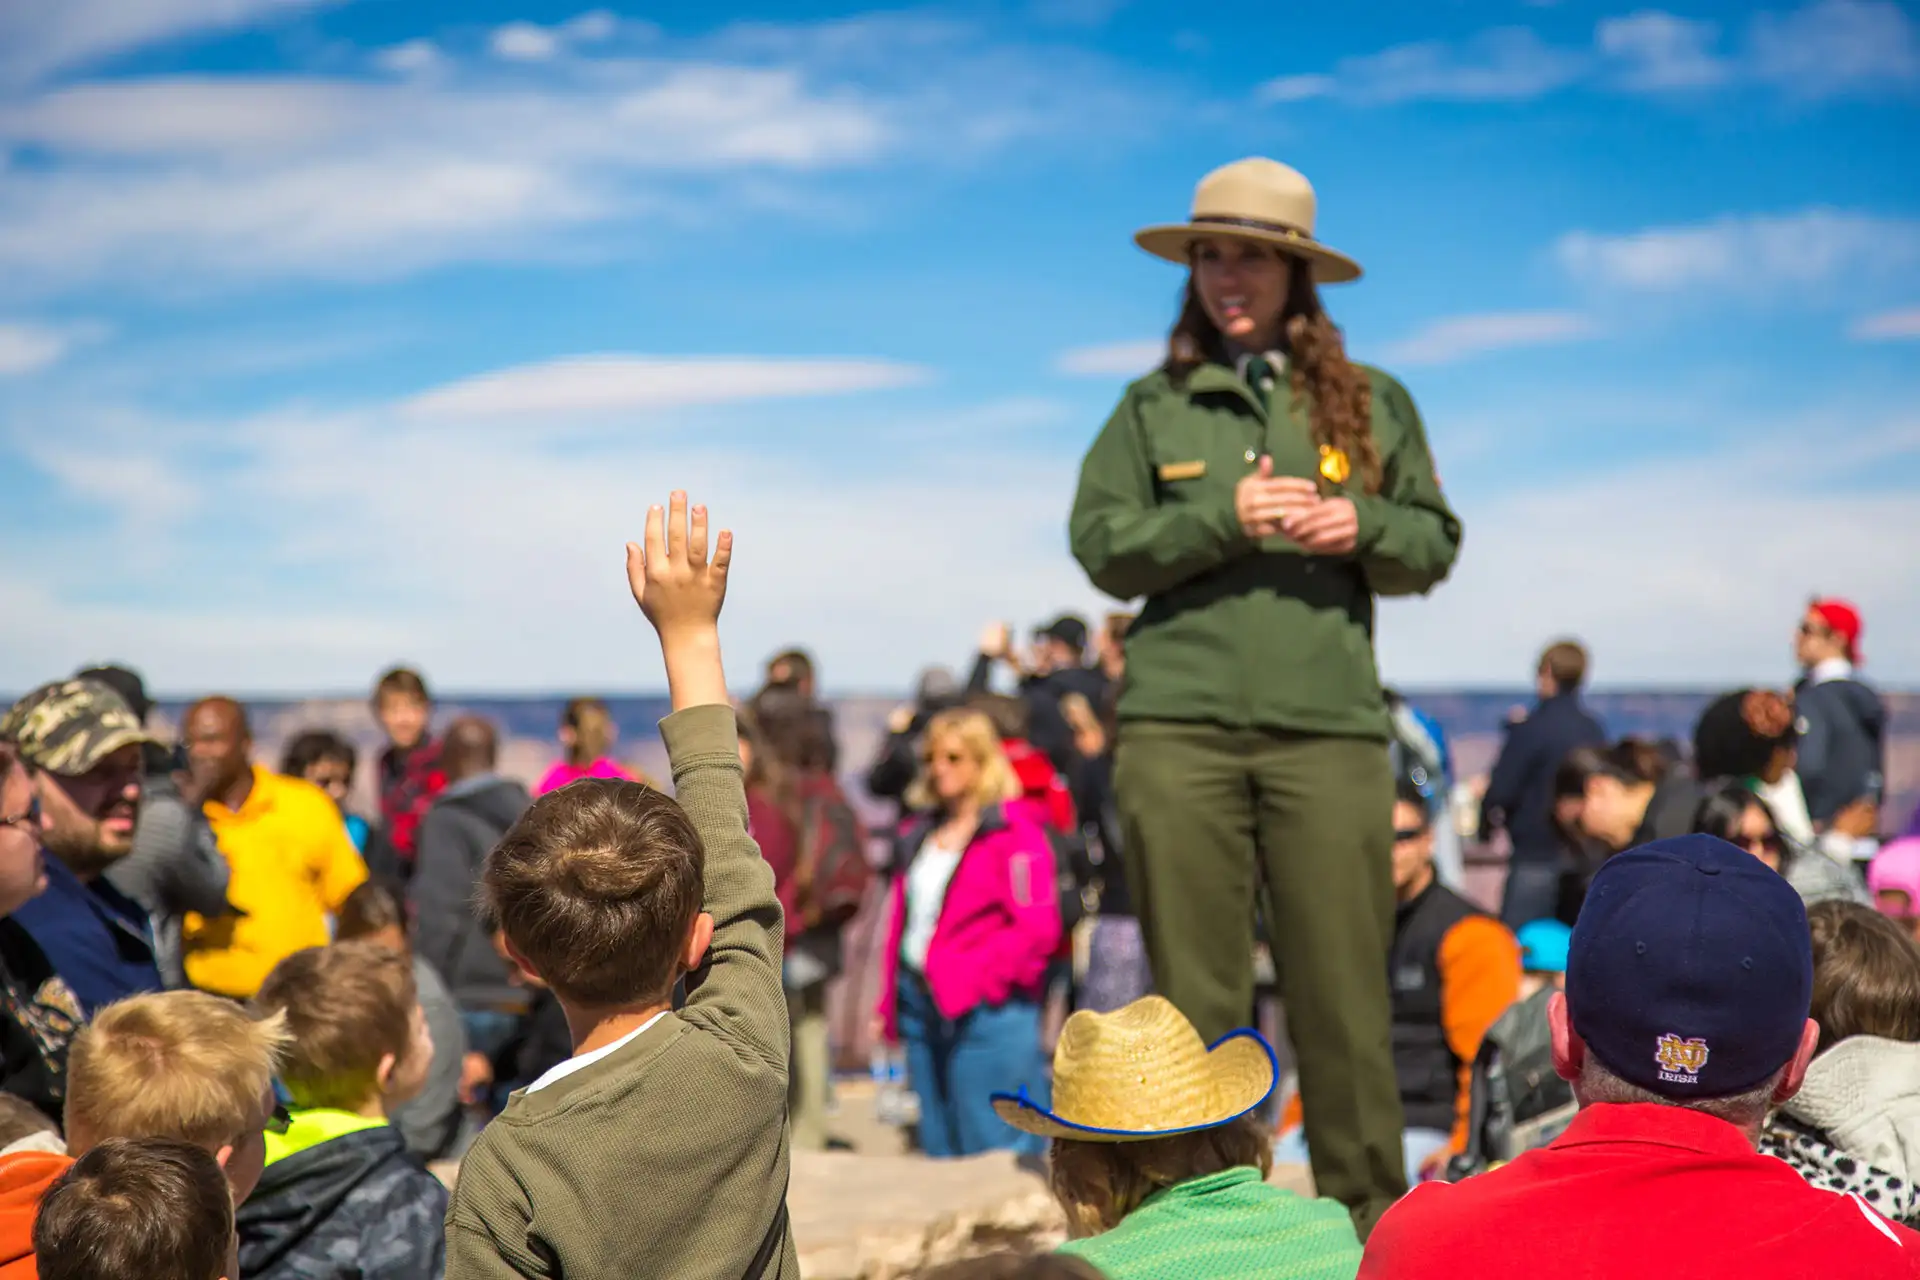 A park ranger replying to a kid's question in the south rim of Grand Canyon National Park, Arizona